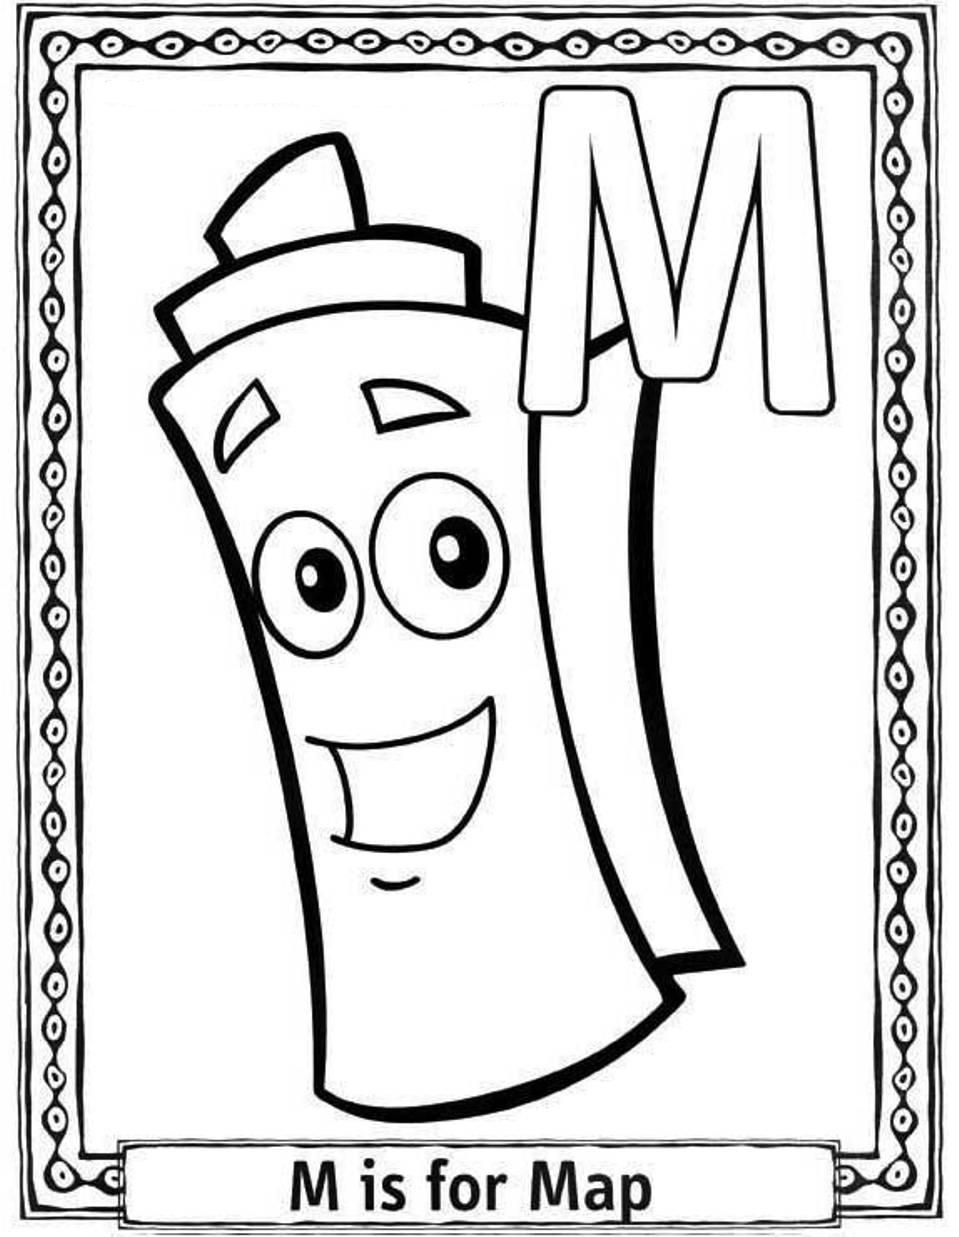 Dora the Explorer Map Coloring Pages - Get Coloring Pages